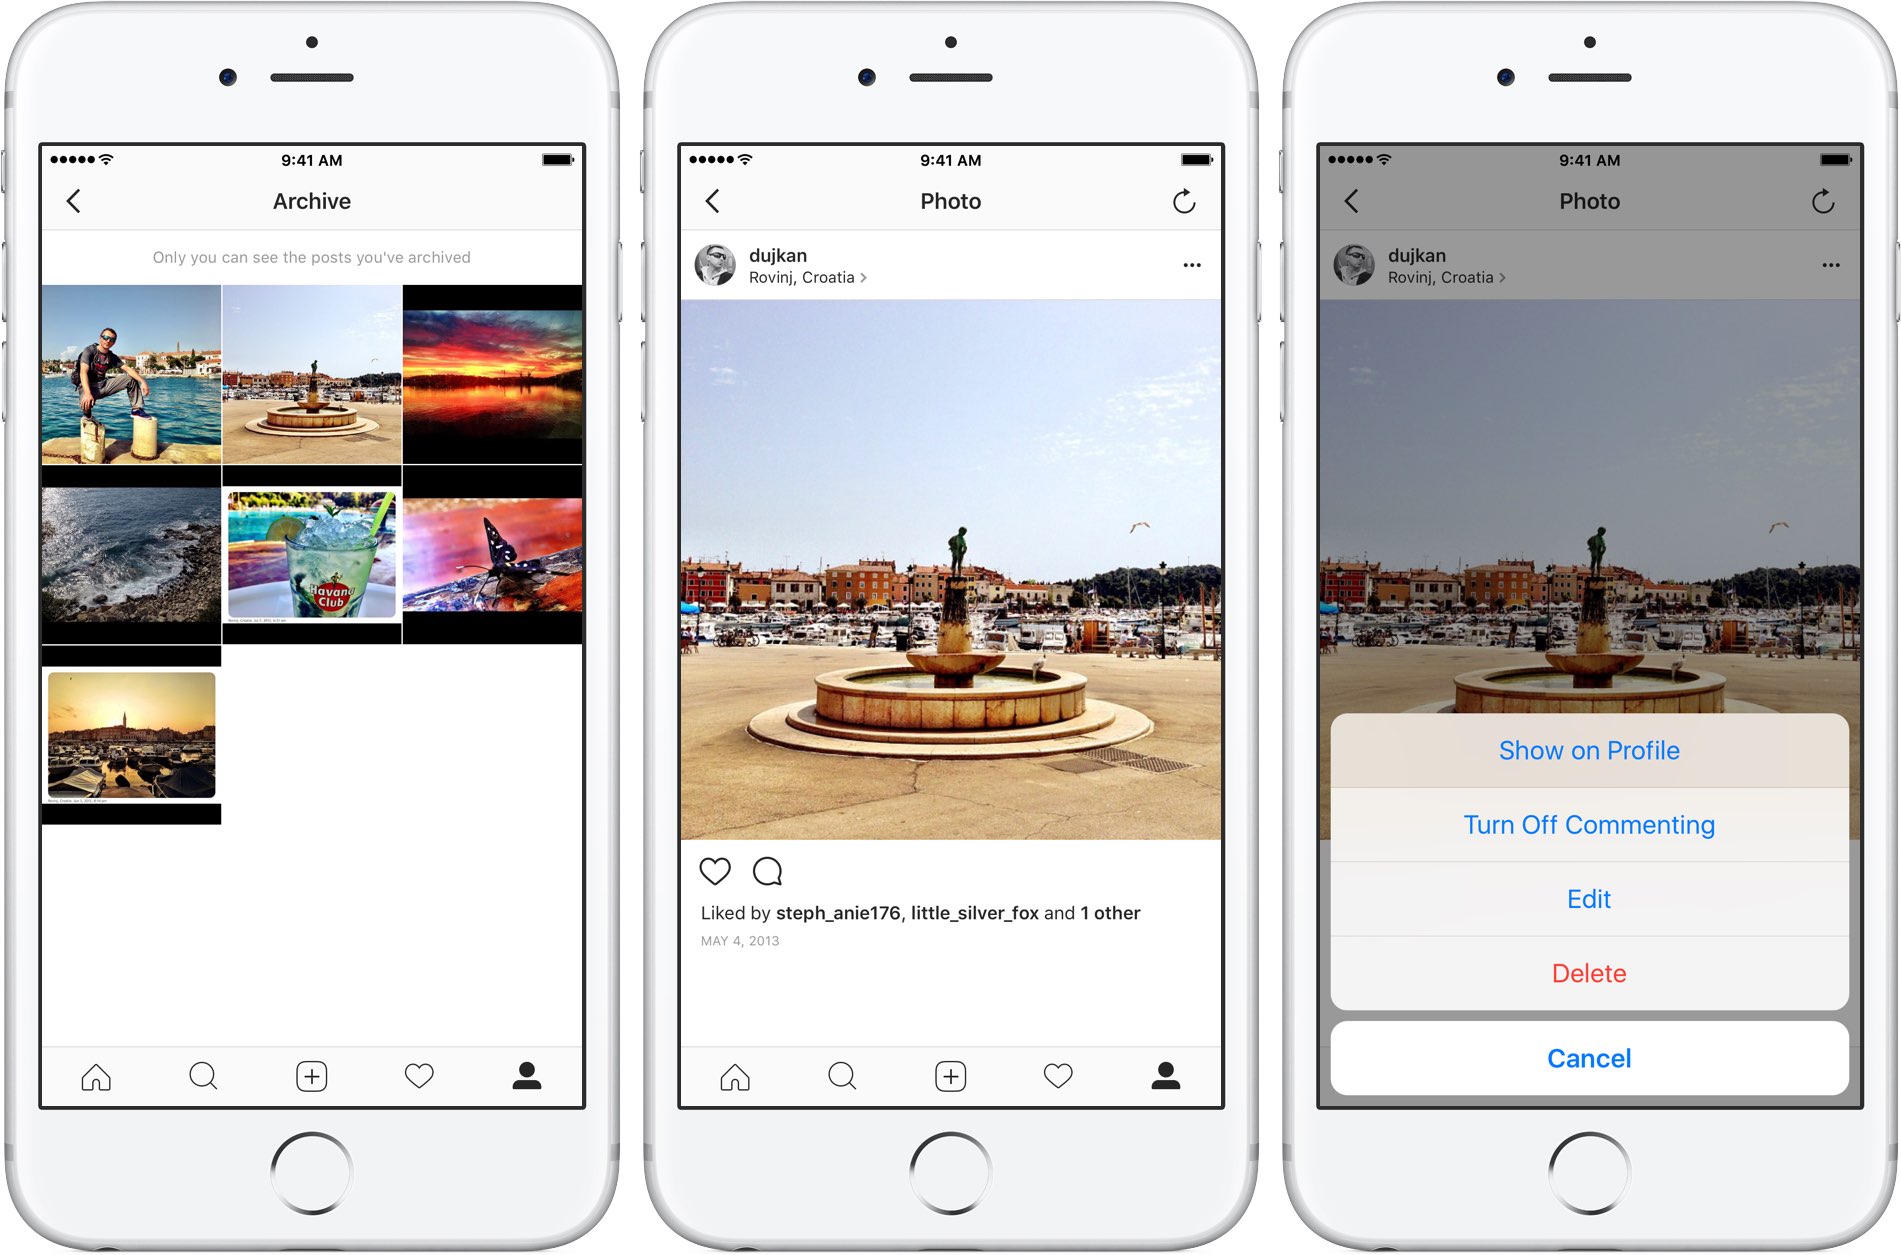 How to archive photos to Instagram